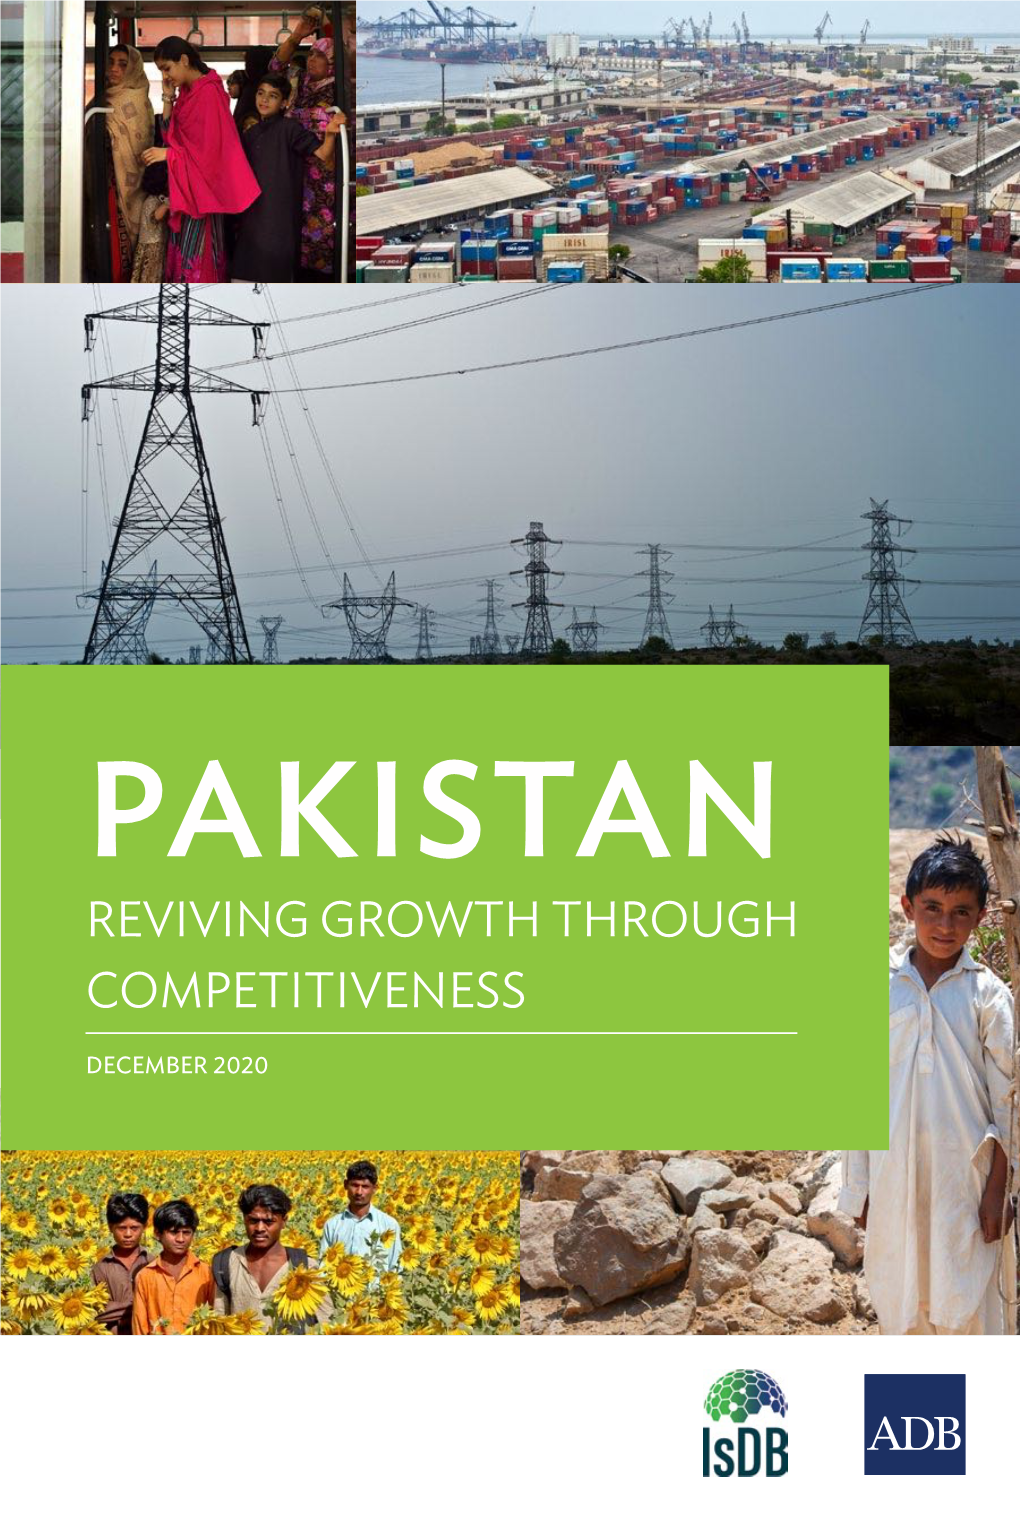 Pakistan—Reviving Growth Through Competitiveness